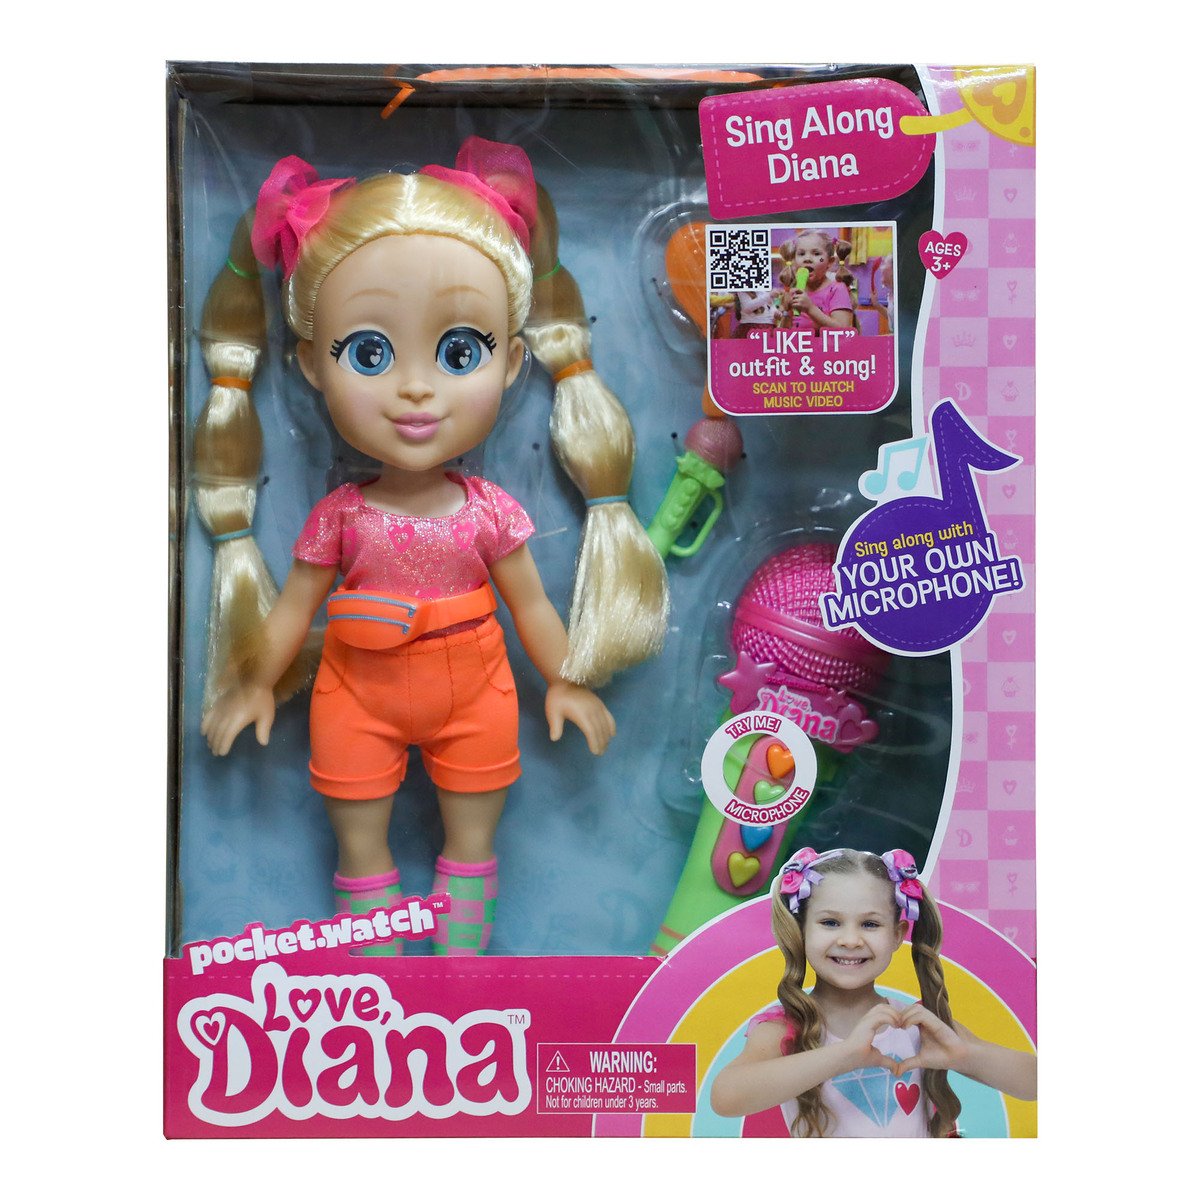 Love Diana Sing Along Diana 13inch Doll 20508 Online at Best Price ...